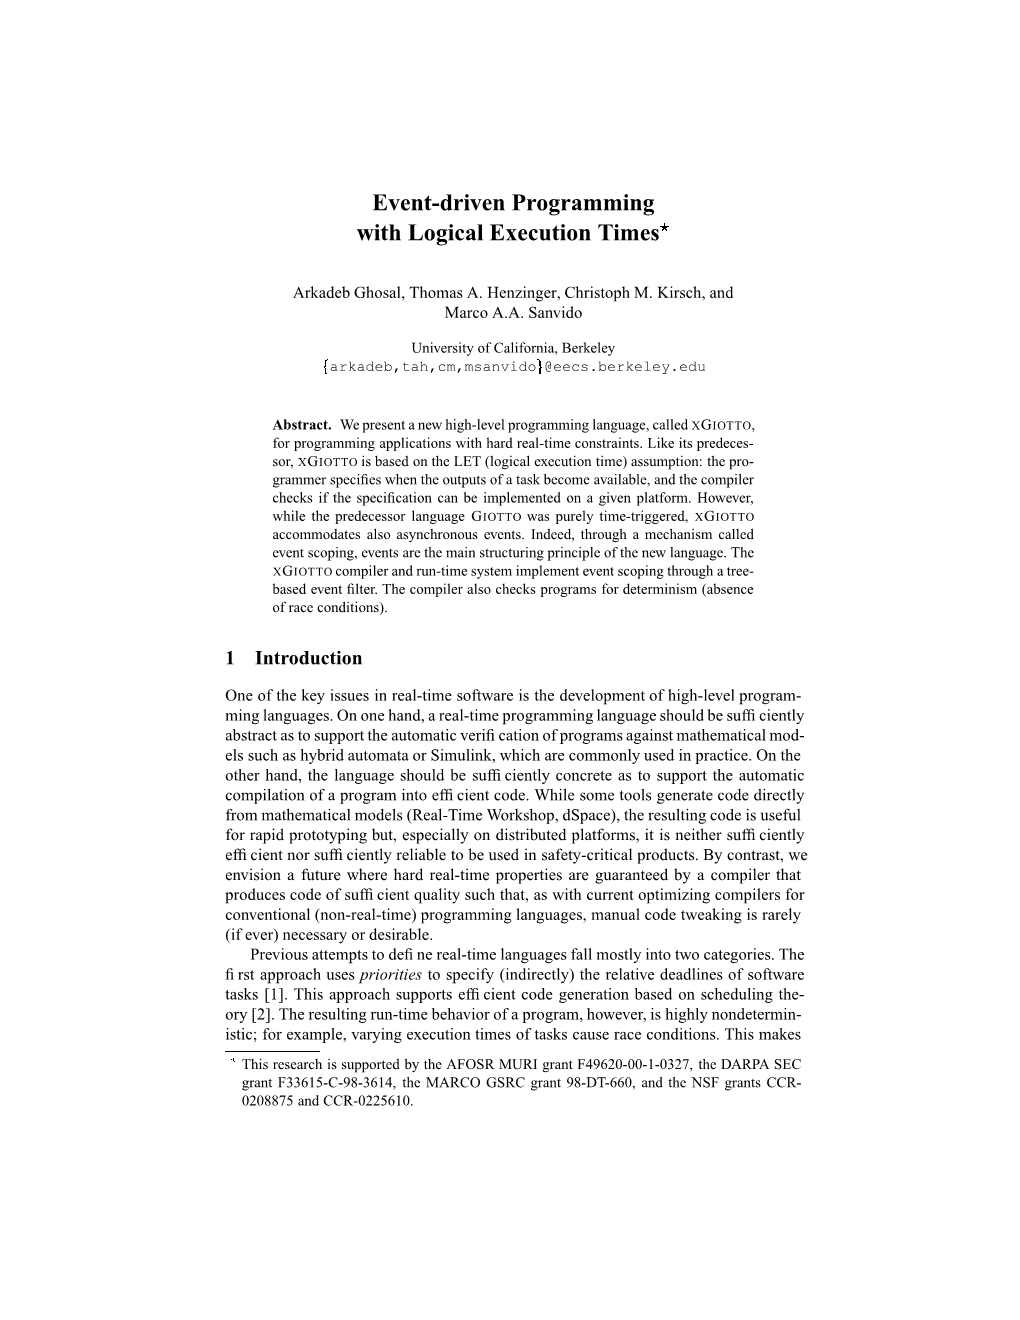 Event-Driven Programming with Logical Execution Times